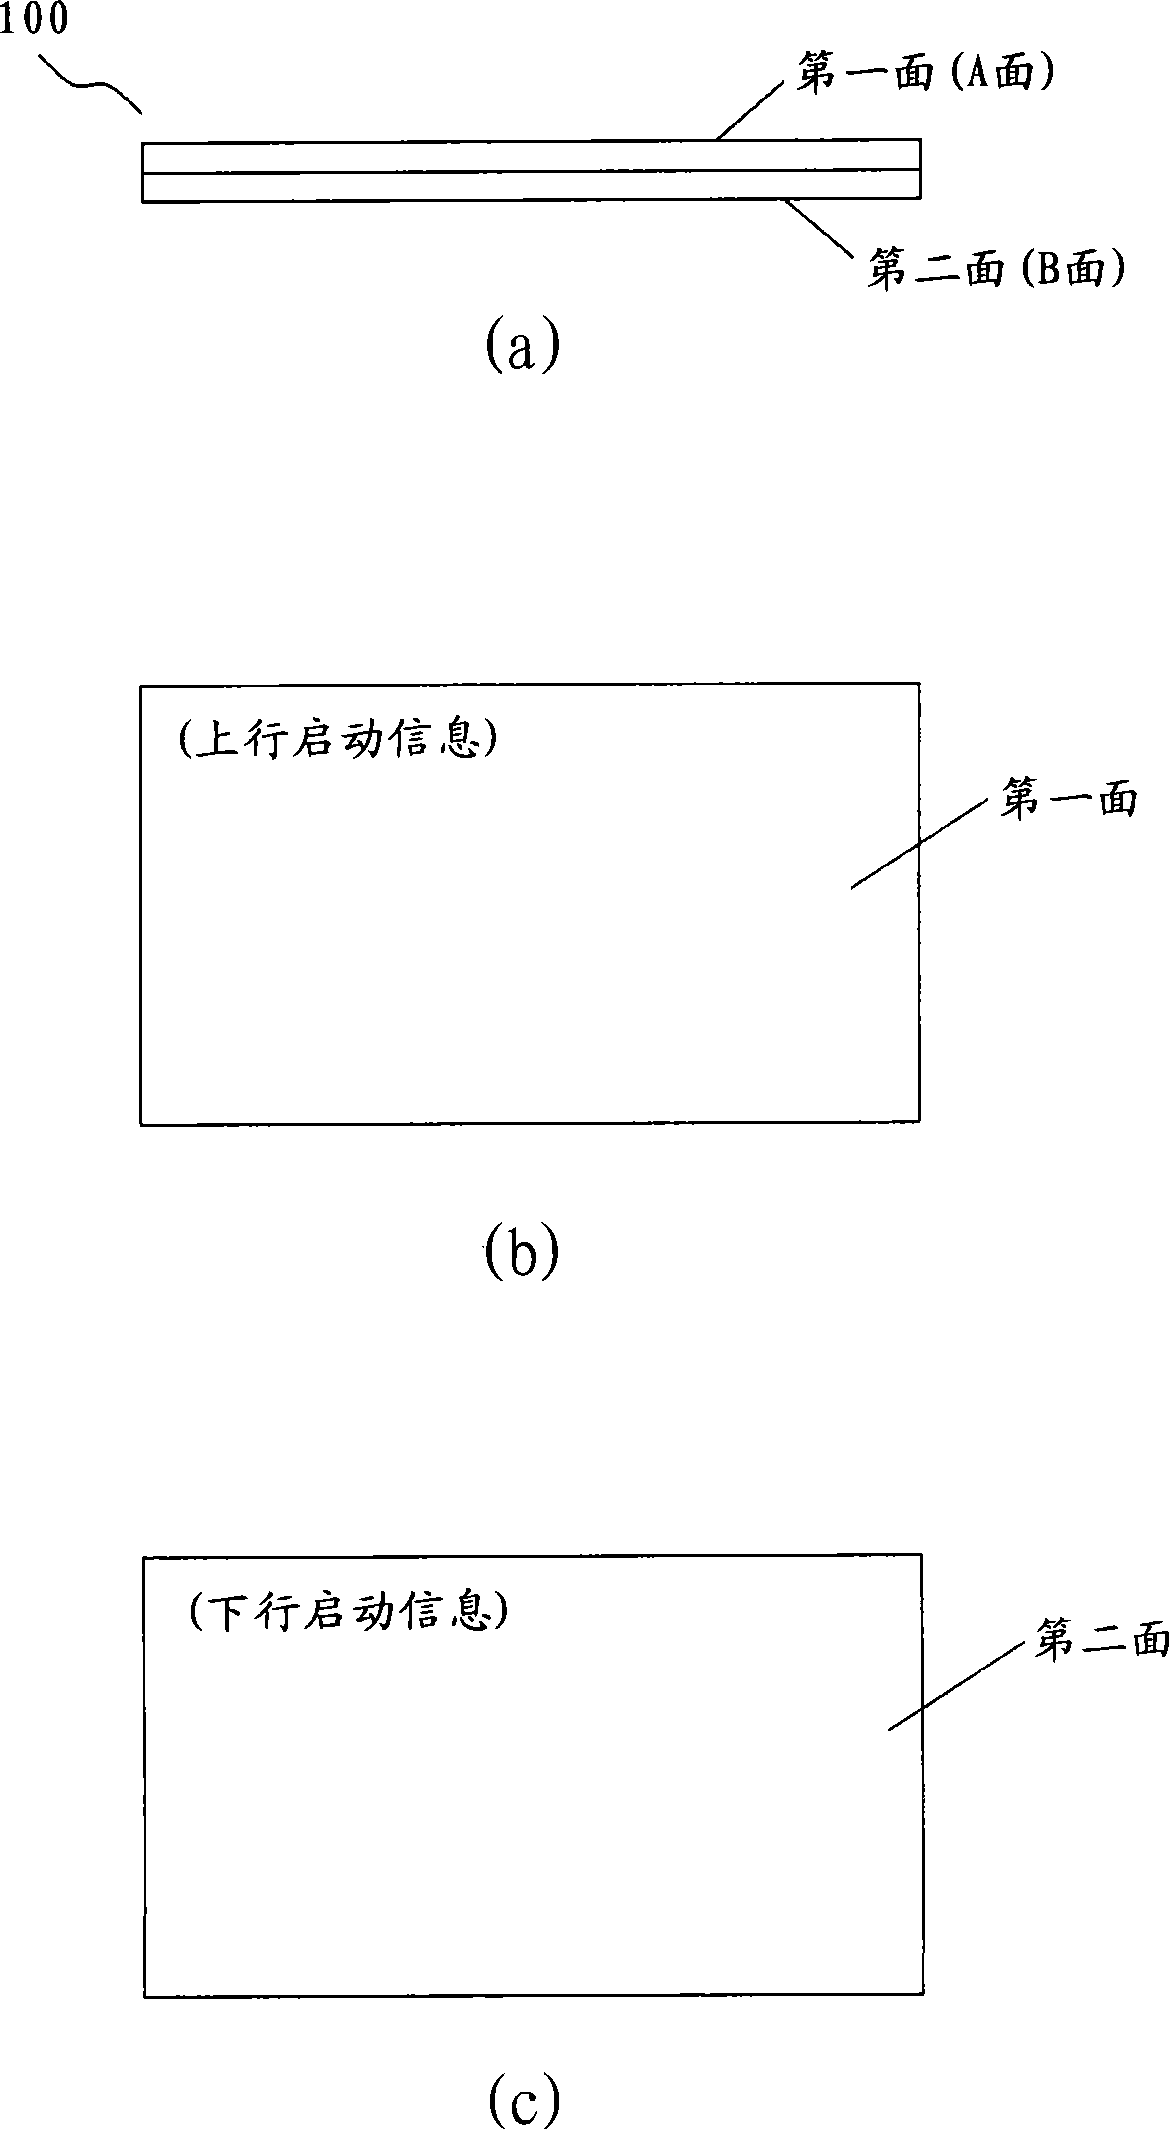 Smart card, apparatus method and system for controlling escalator